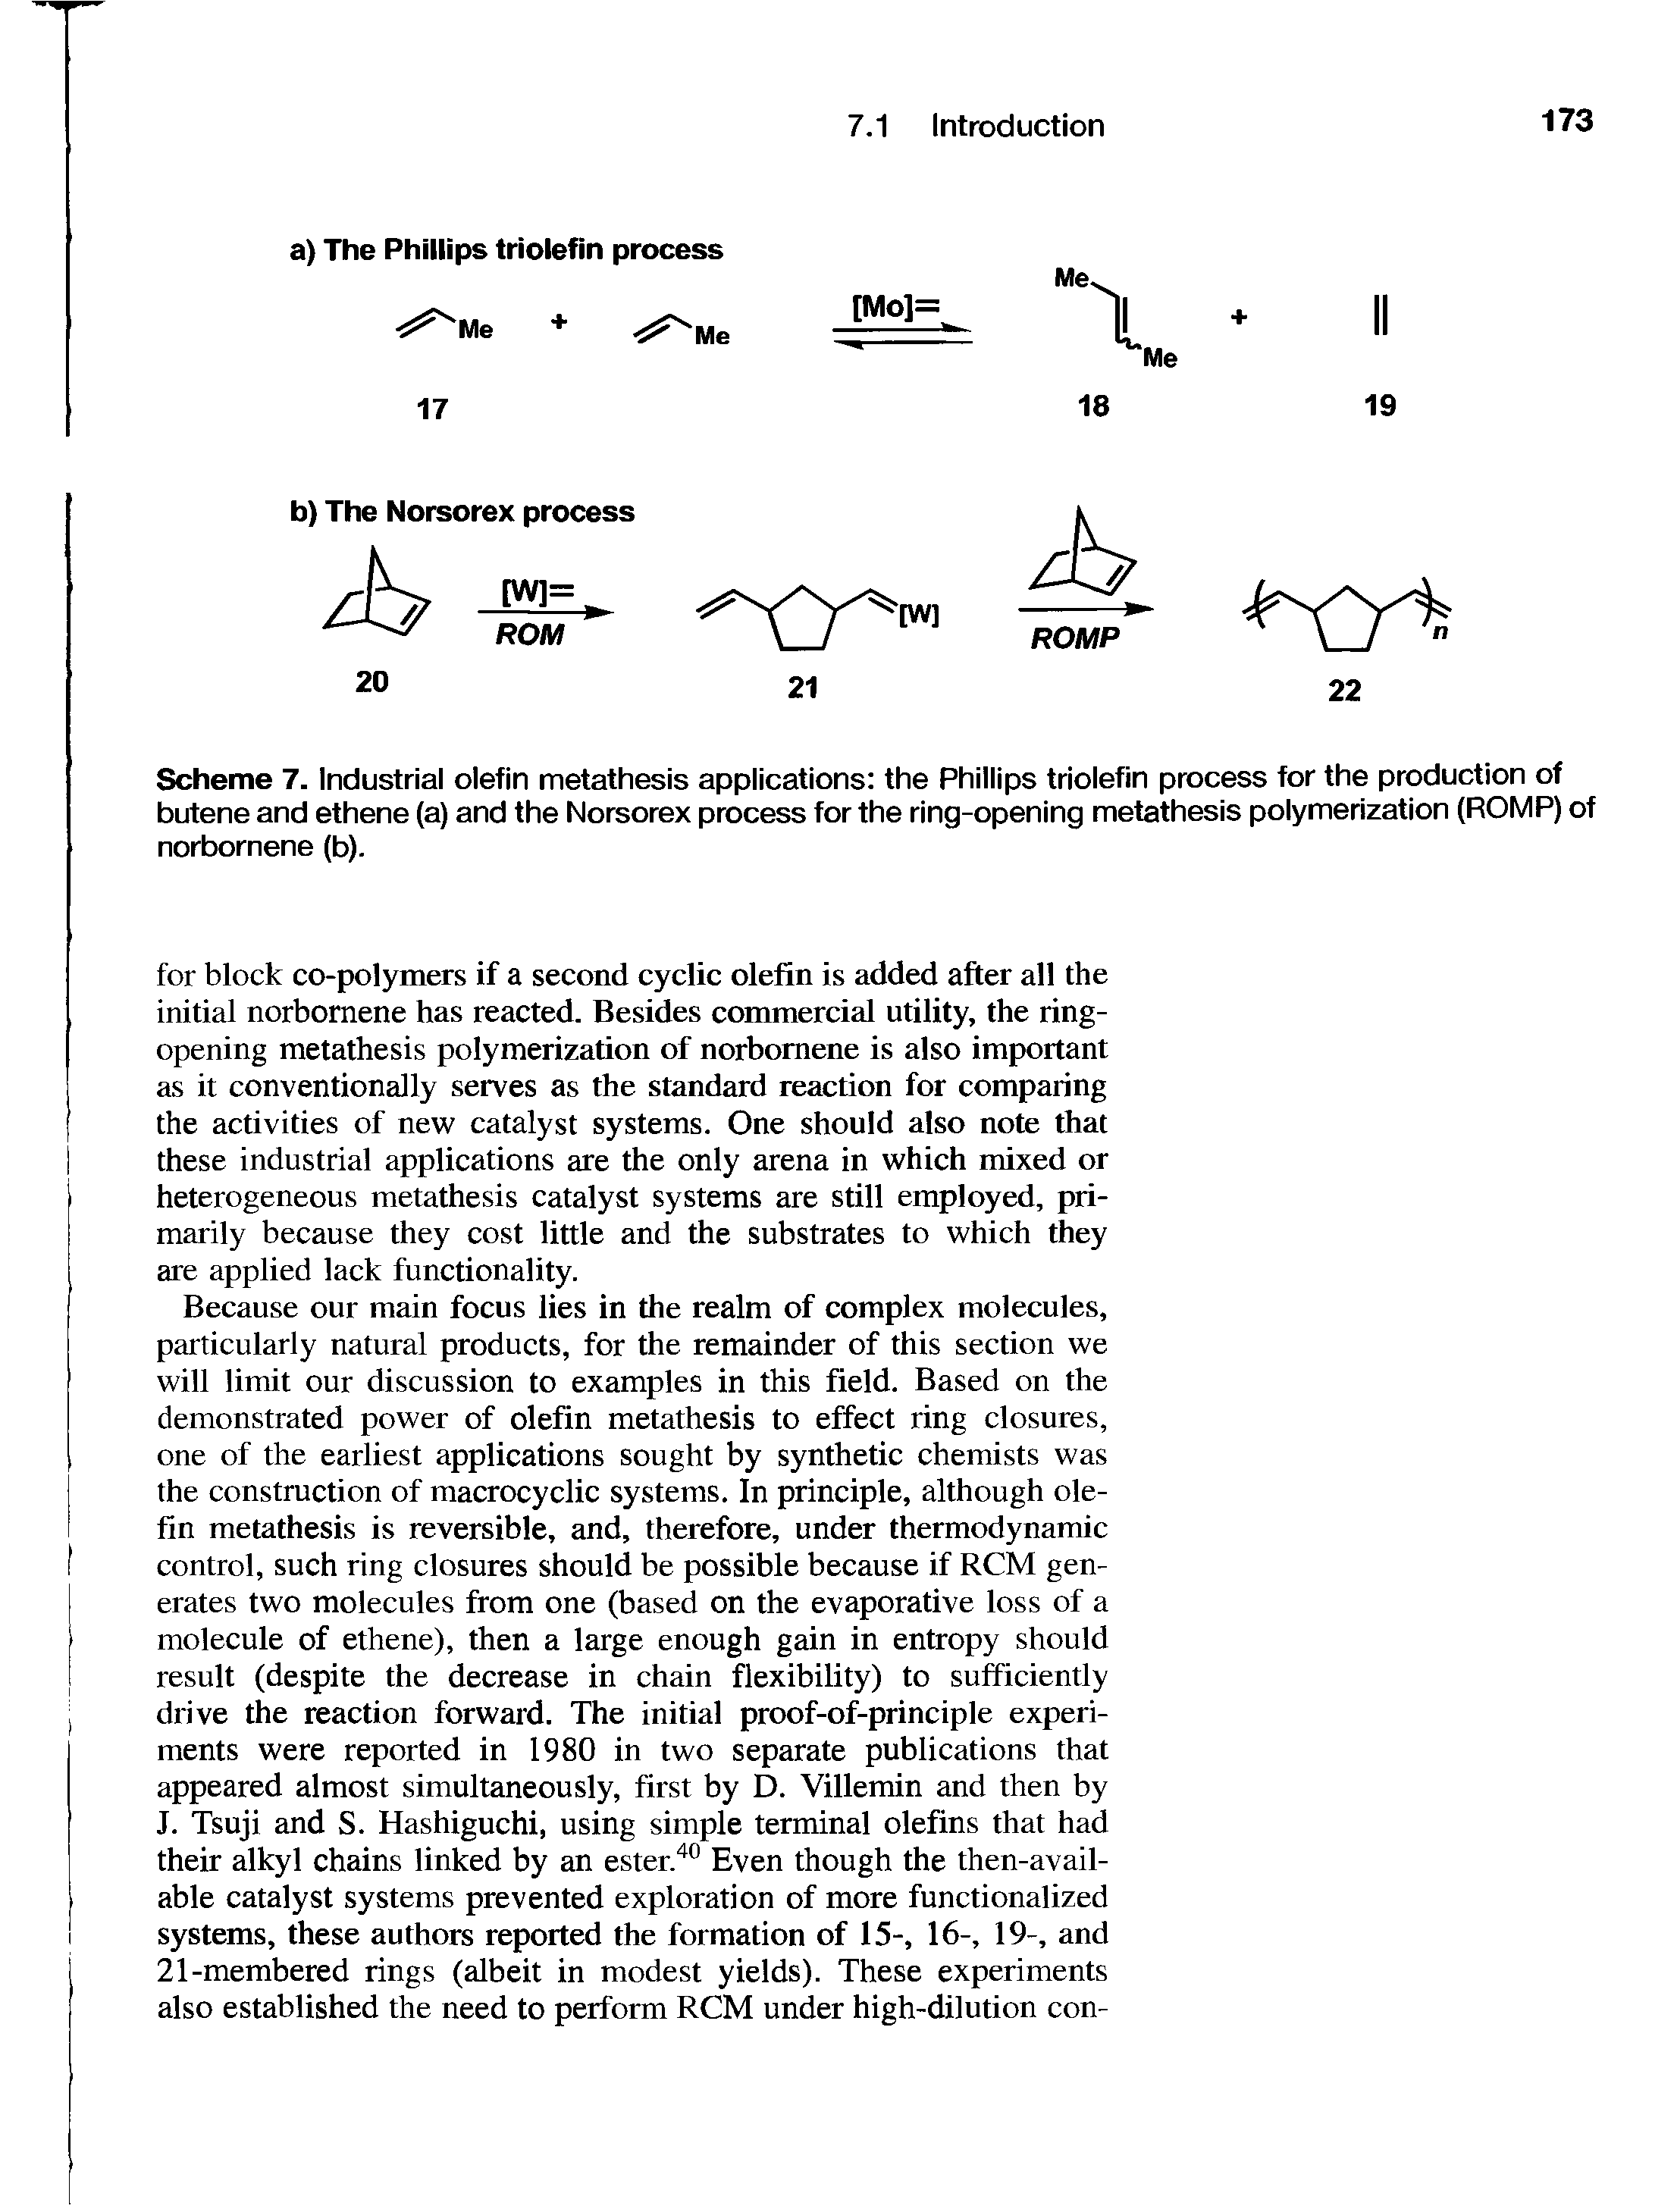 Scheme 7. Industrial olefin metathesis applications the Phillips triolefin process for the production of butene and ethene (a) and the Norsorex process for the ring-opening metathesis polymerization (ROMP) of norbornene (b).